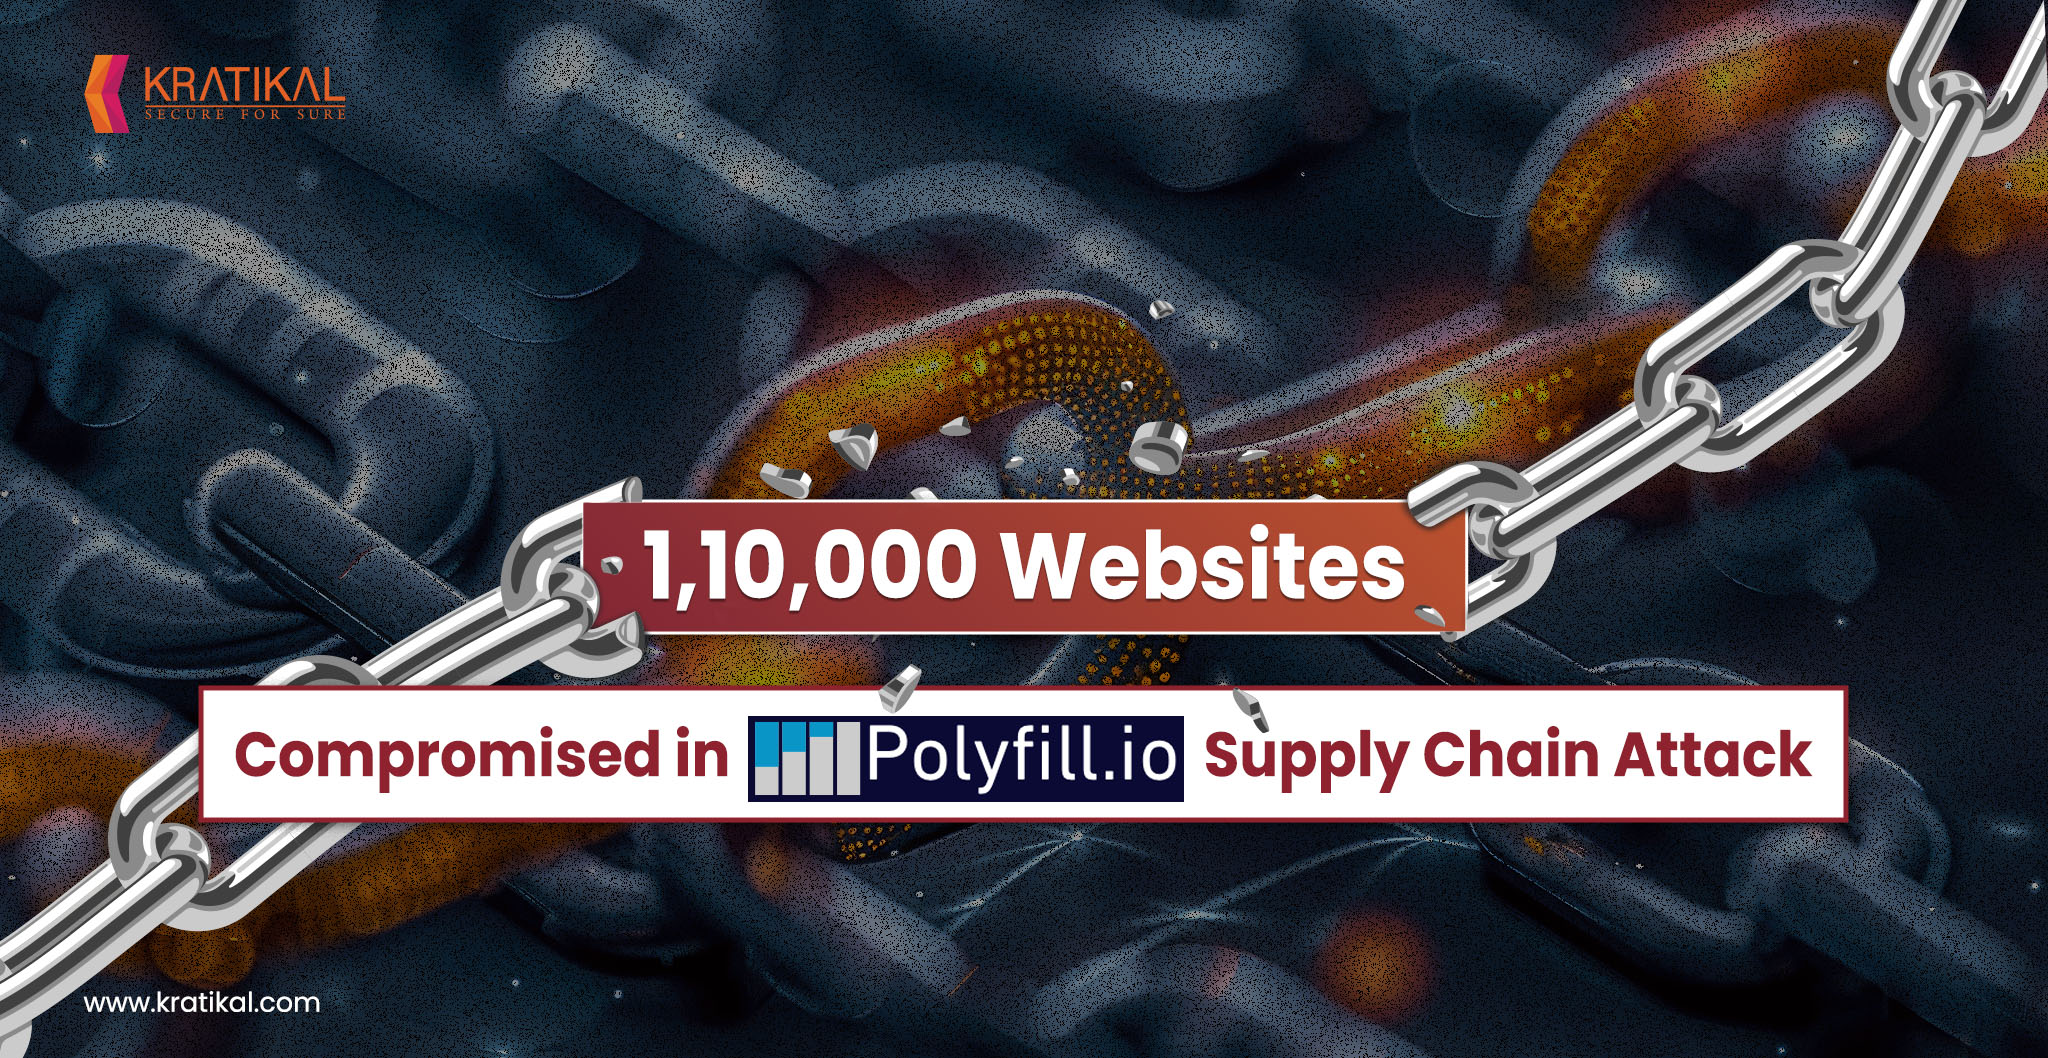 1,10,000 Websites Compromised in Polyfill Supply Chain Attack